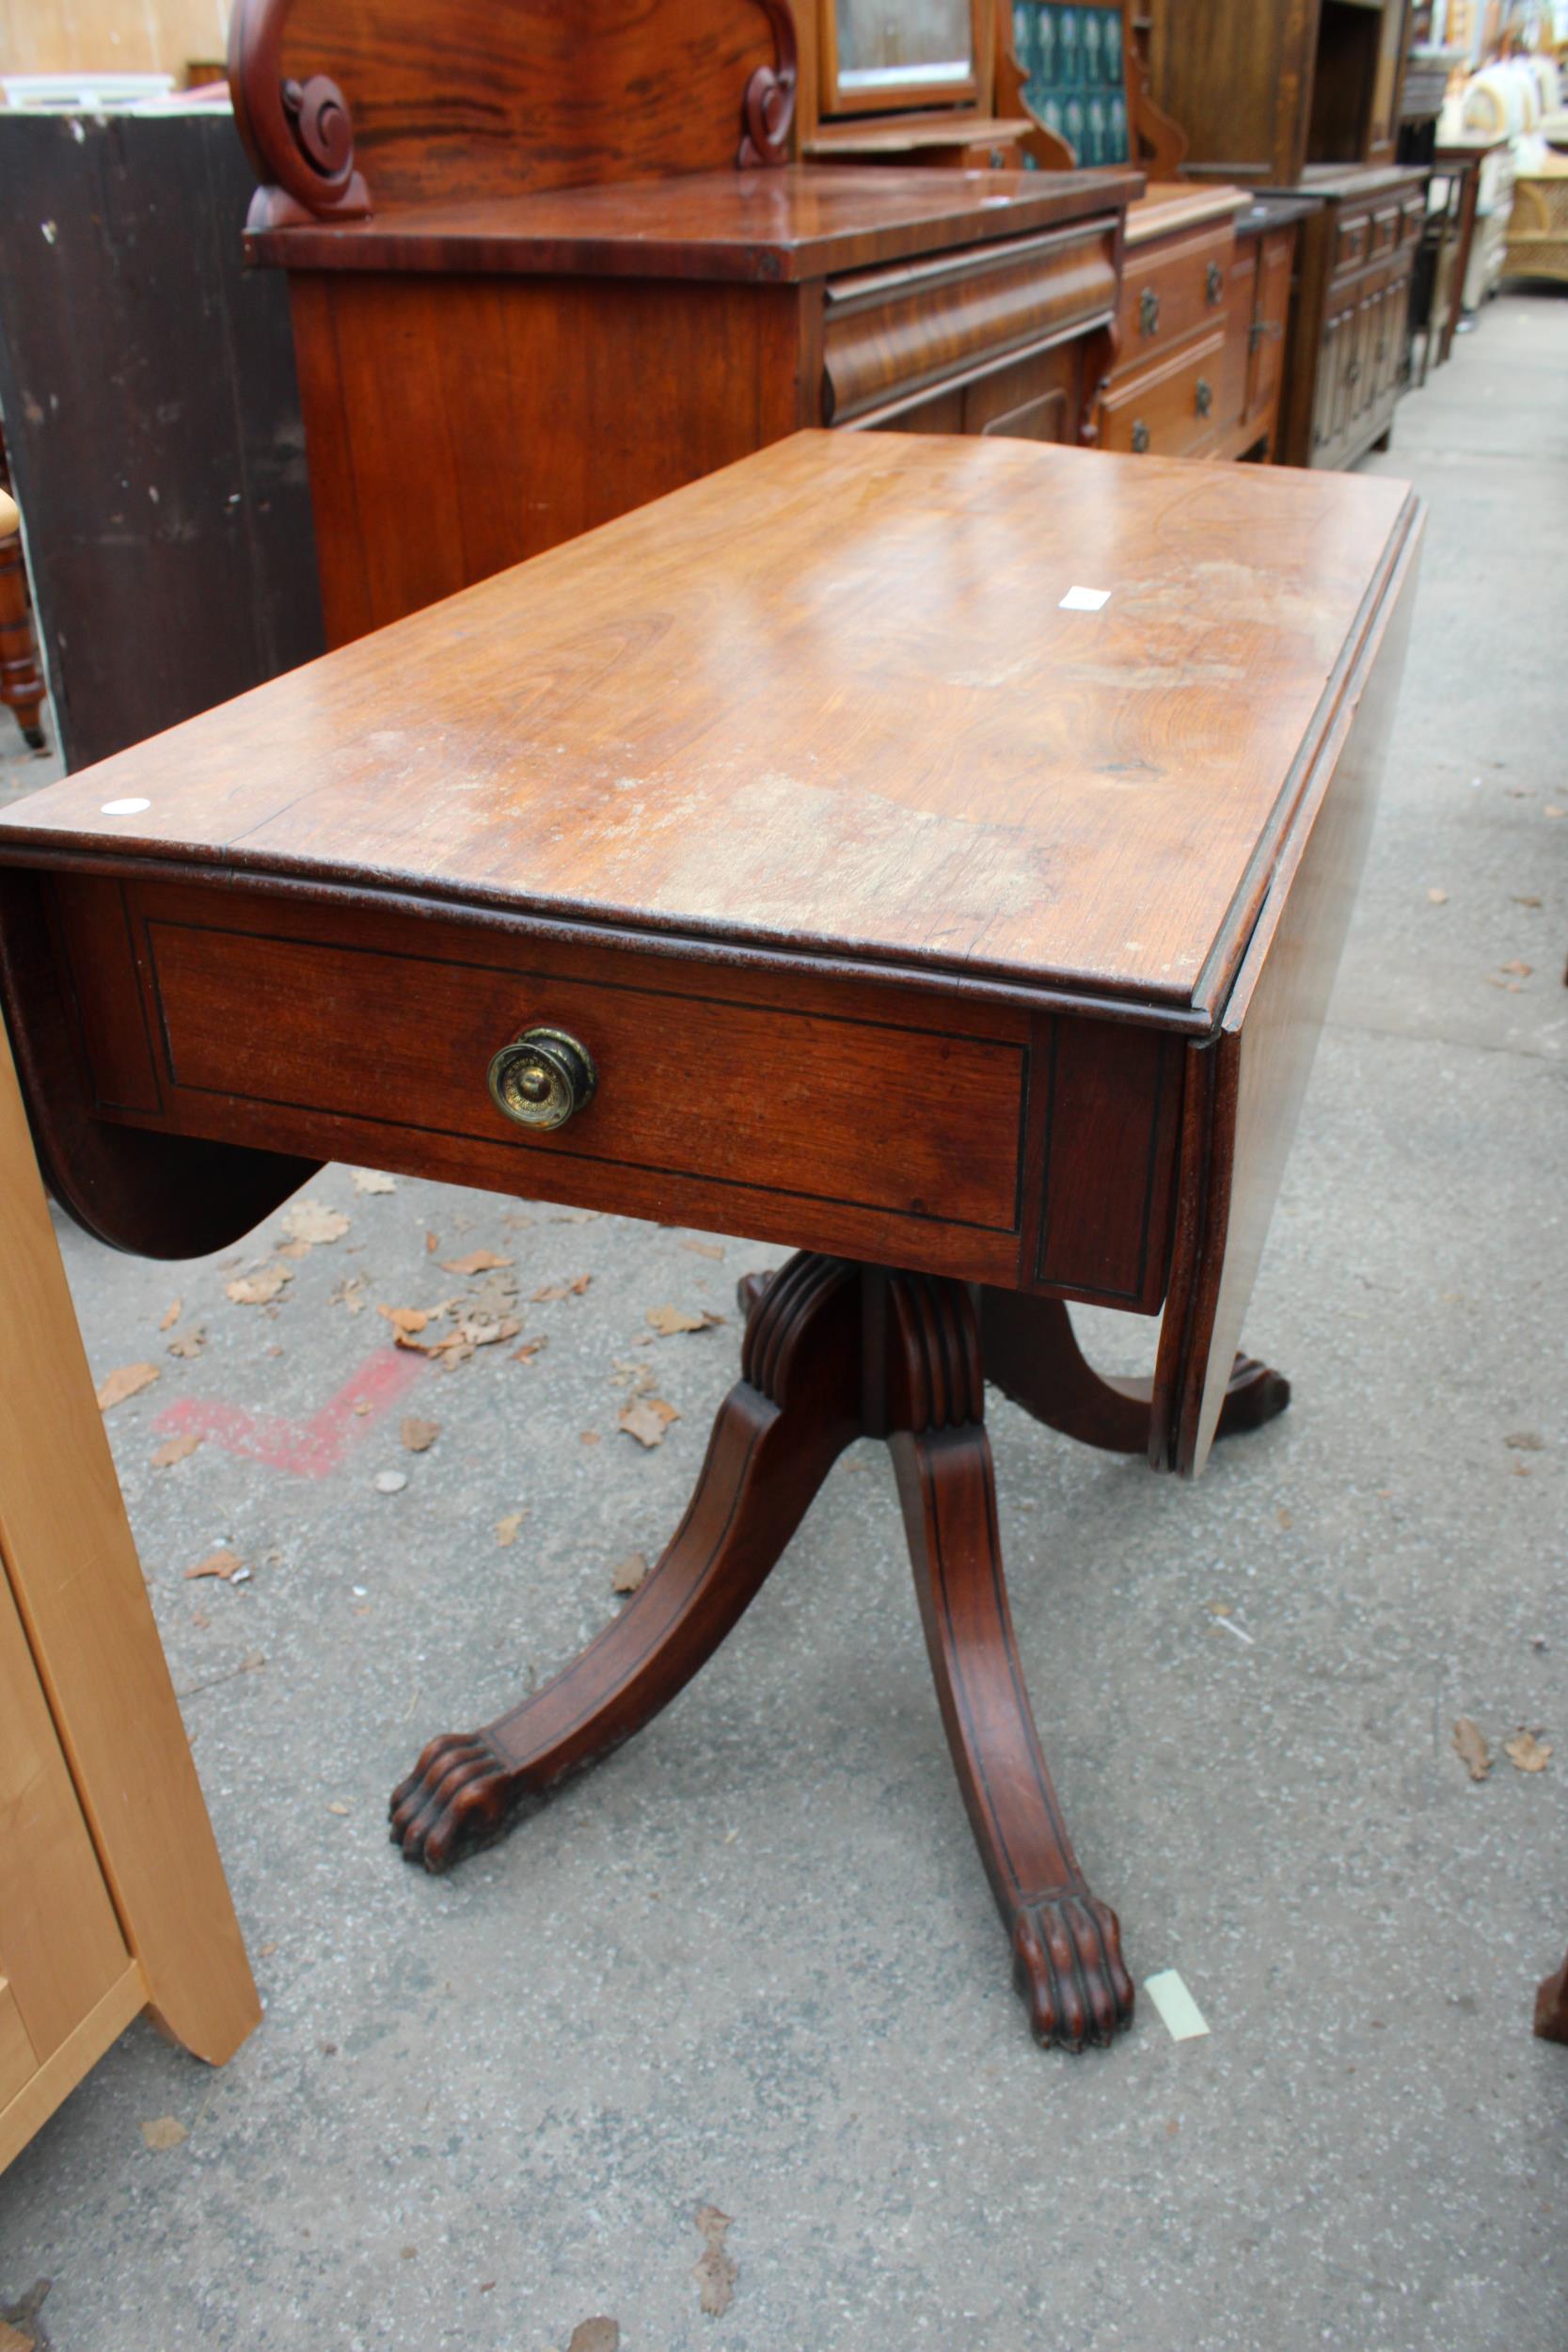 A 19TH CENTURY MAHOGANY DROP LEAF PEDESTAL TABLE WITH ONE DRAWER AND ONE SHAM DRAWER ON SHAM FEET - Image 3 of 4